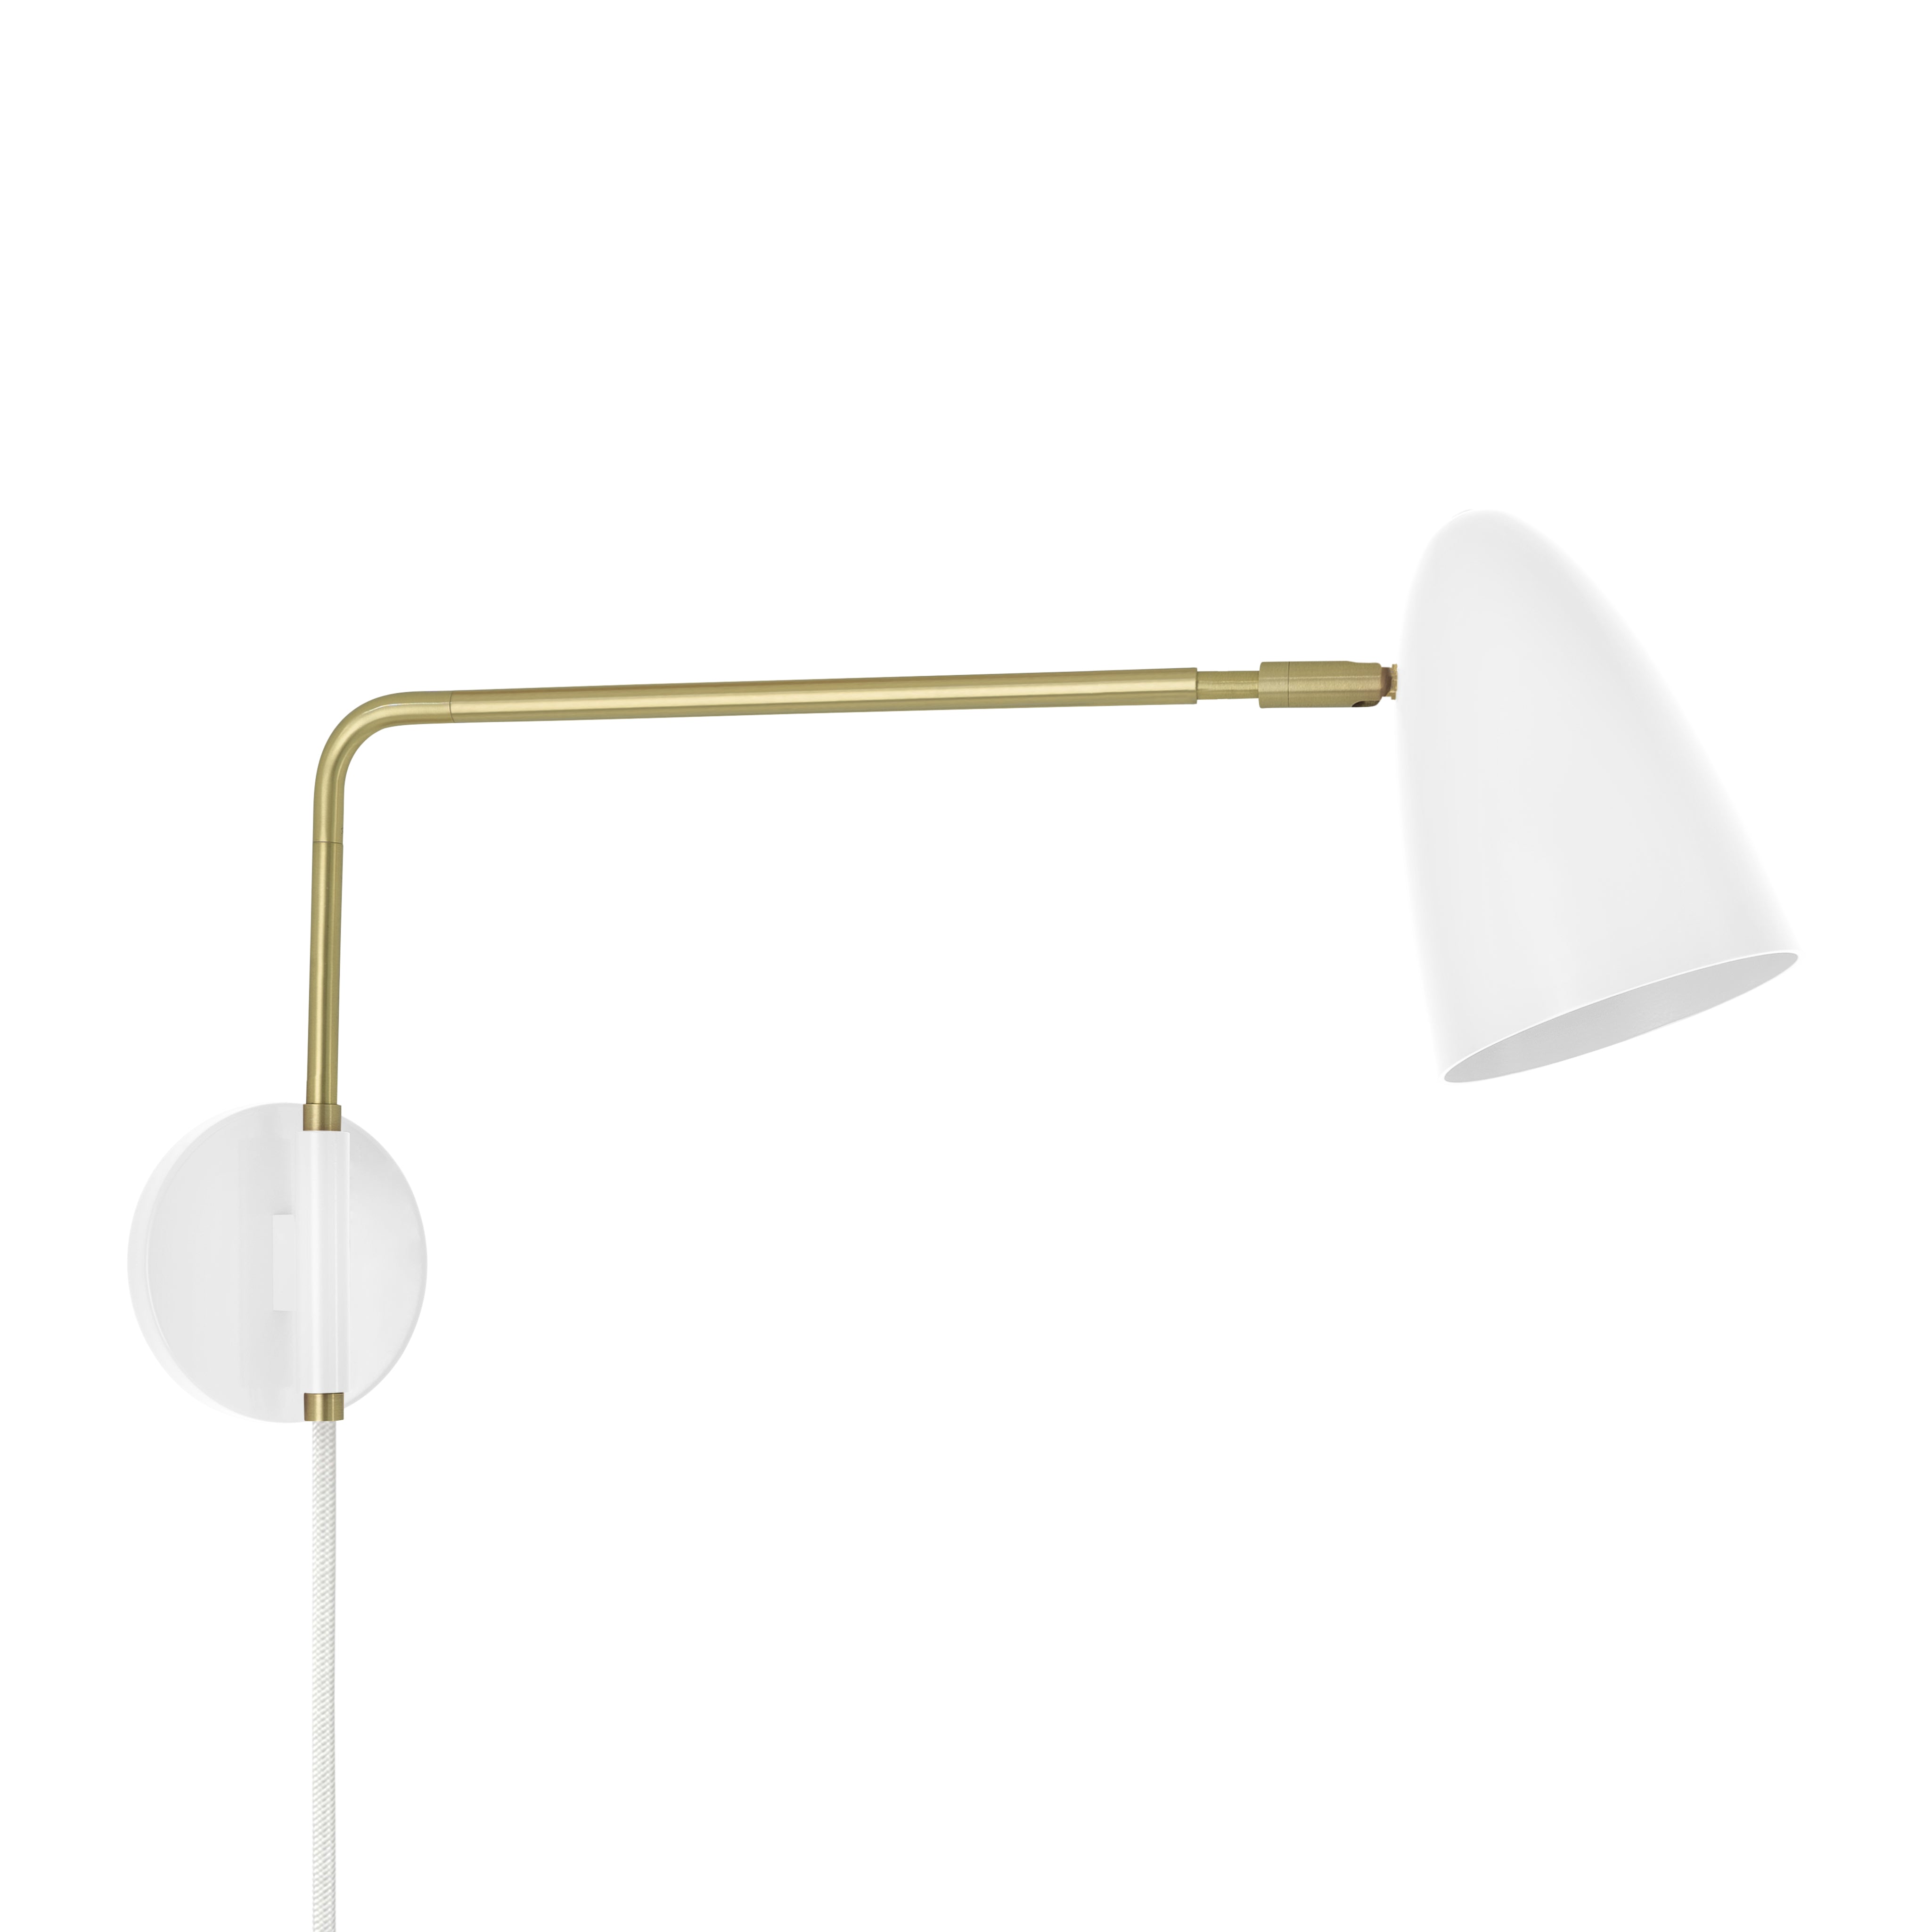 Brass and white color Boom Swing Arm plug-in sconce Dutton Brown lighting